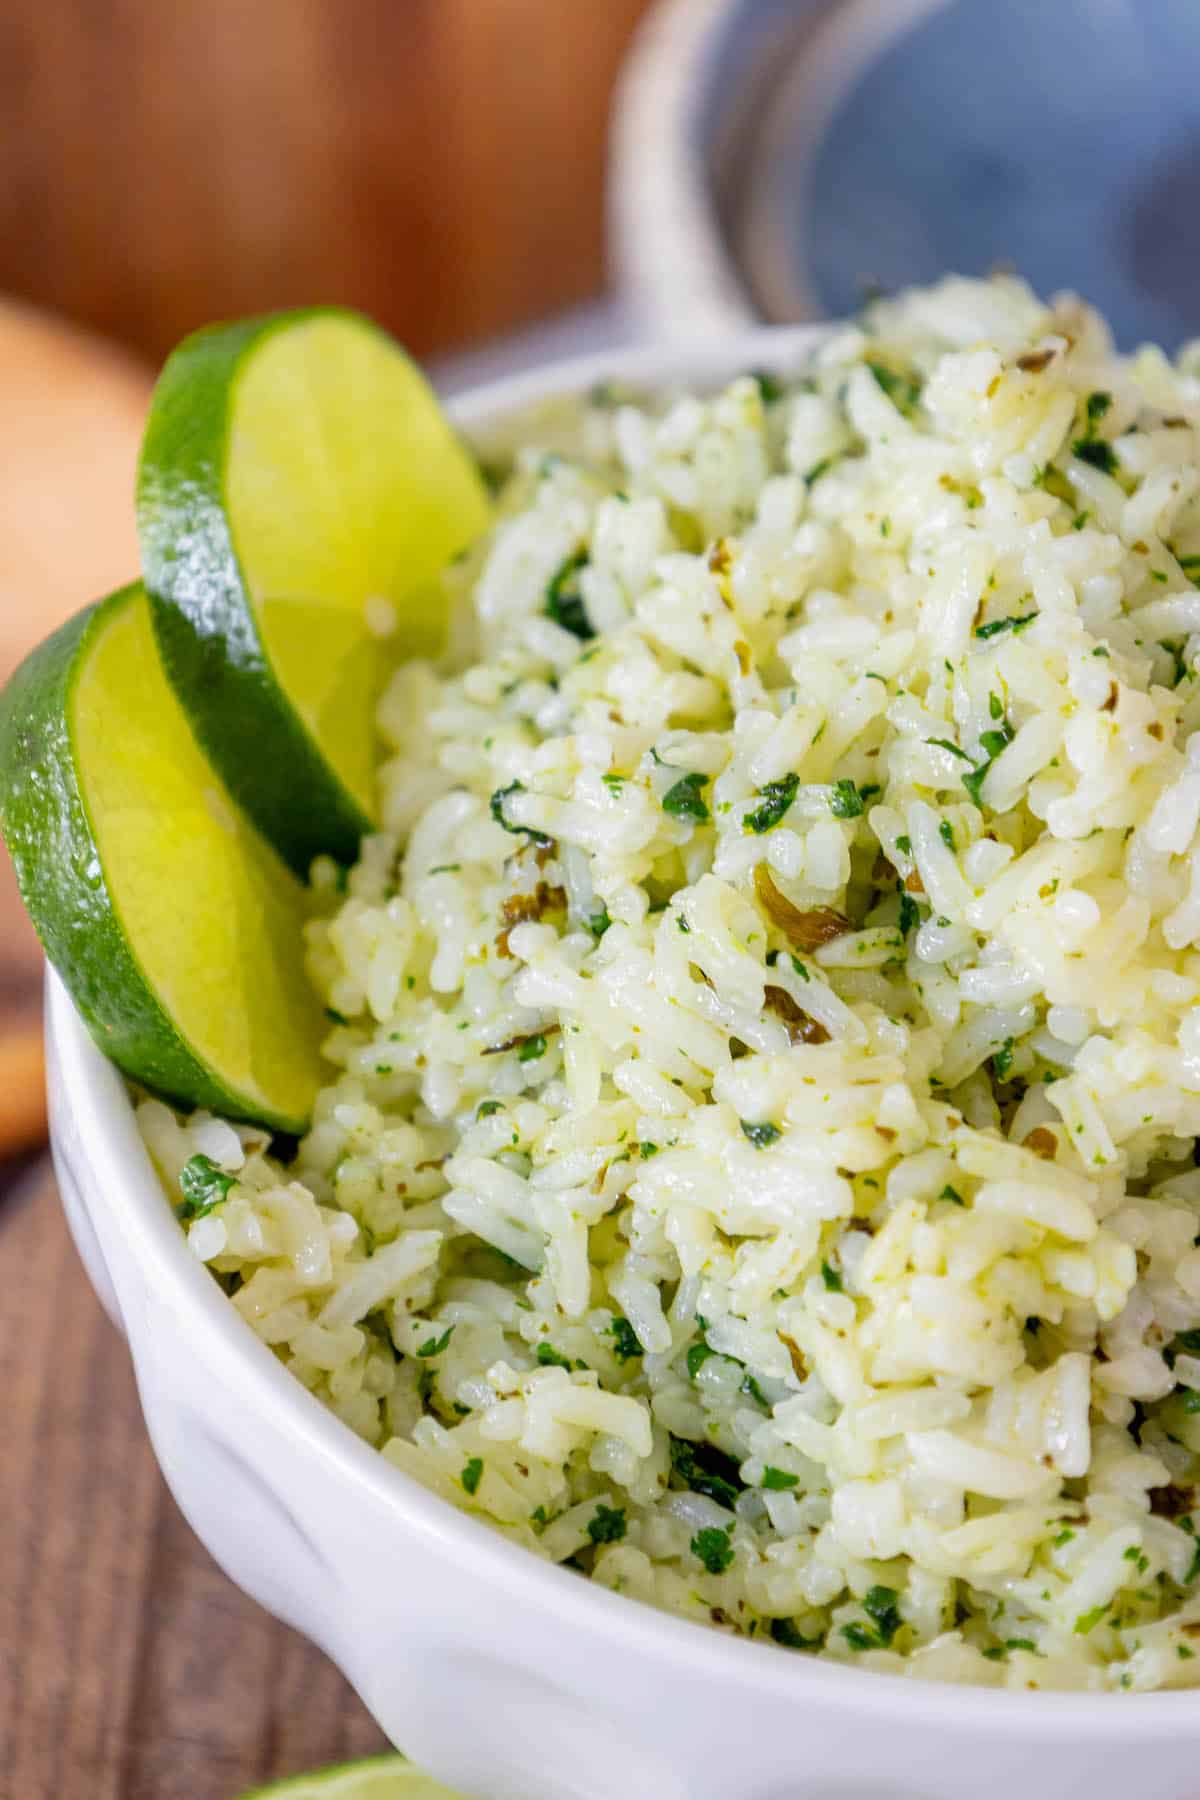 A Chipotle knockoff bowl of cilantro lime rice.